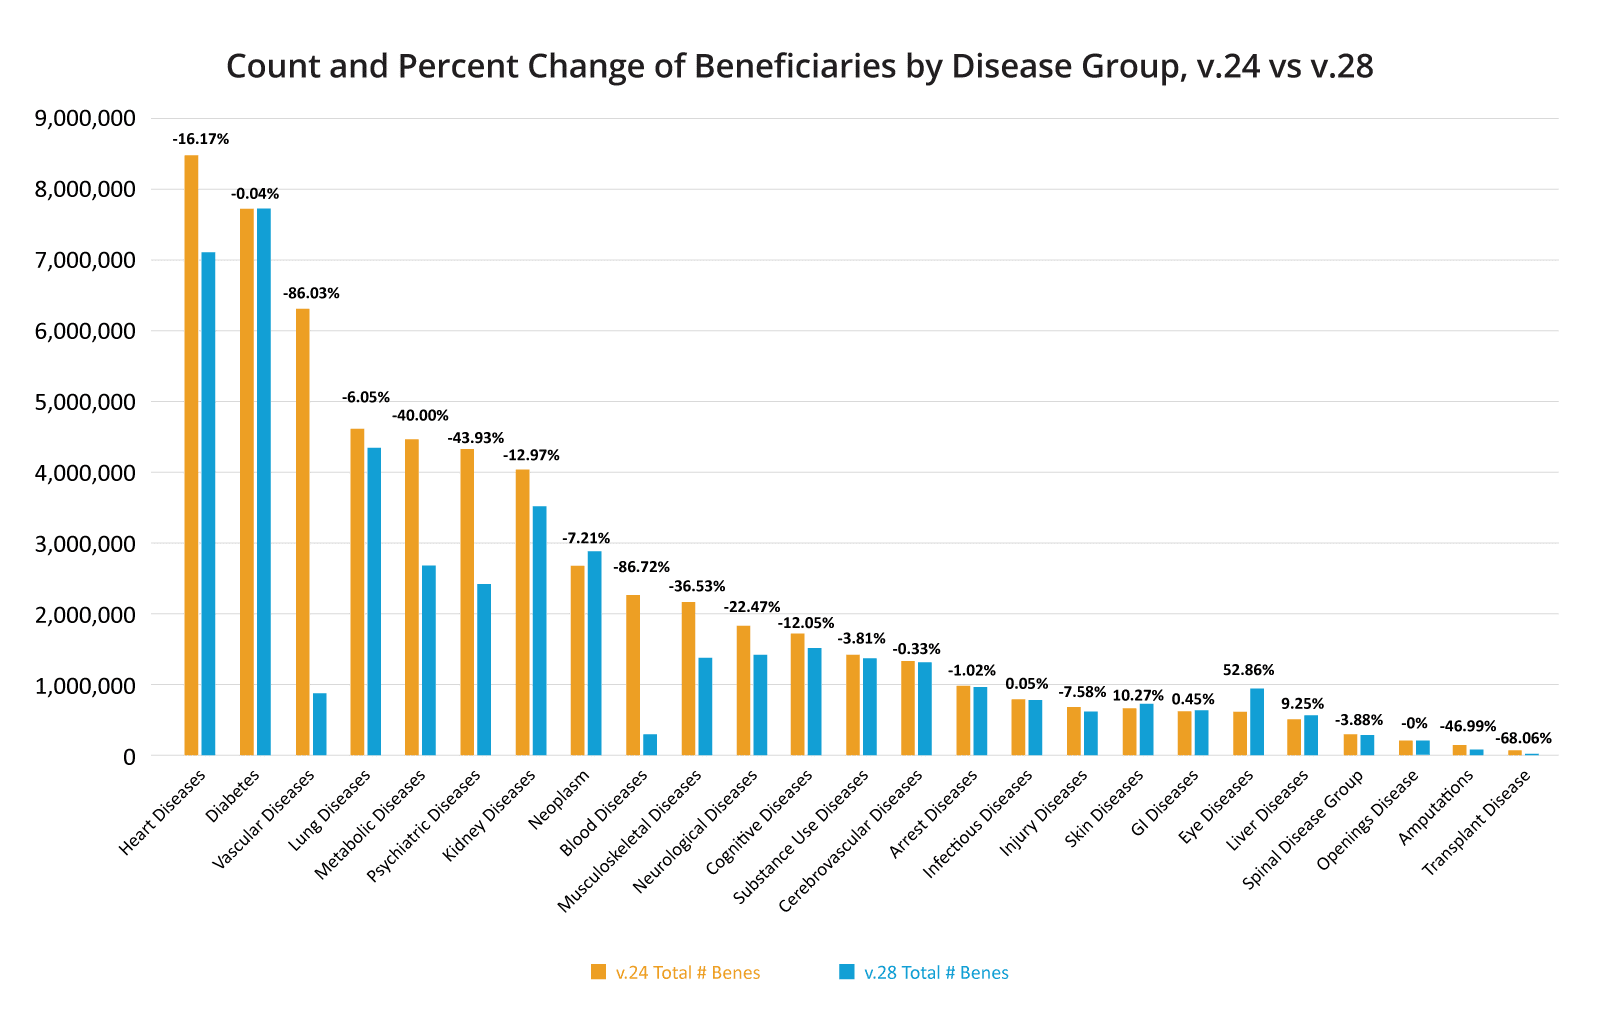 Count and Percent Change of Beneficiaries by Disease Group, v.24 vs v.28